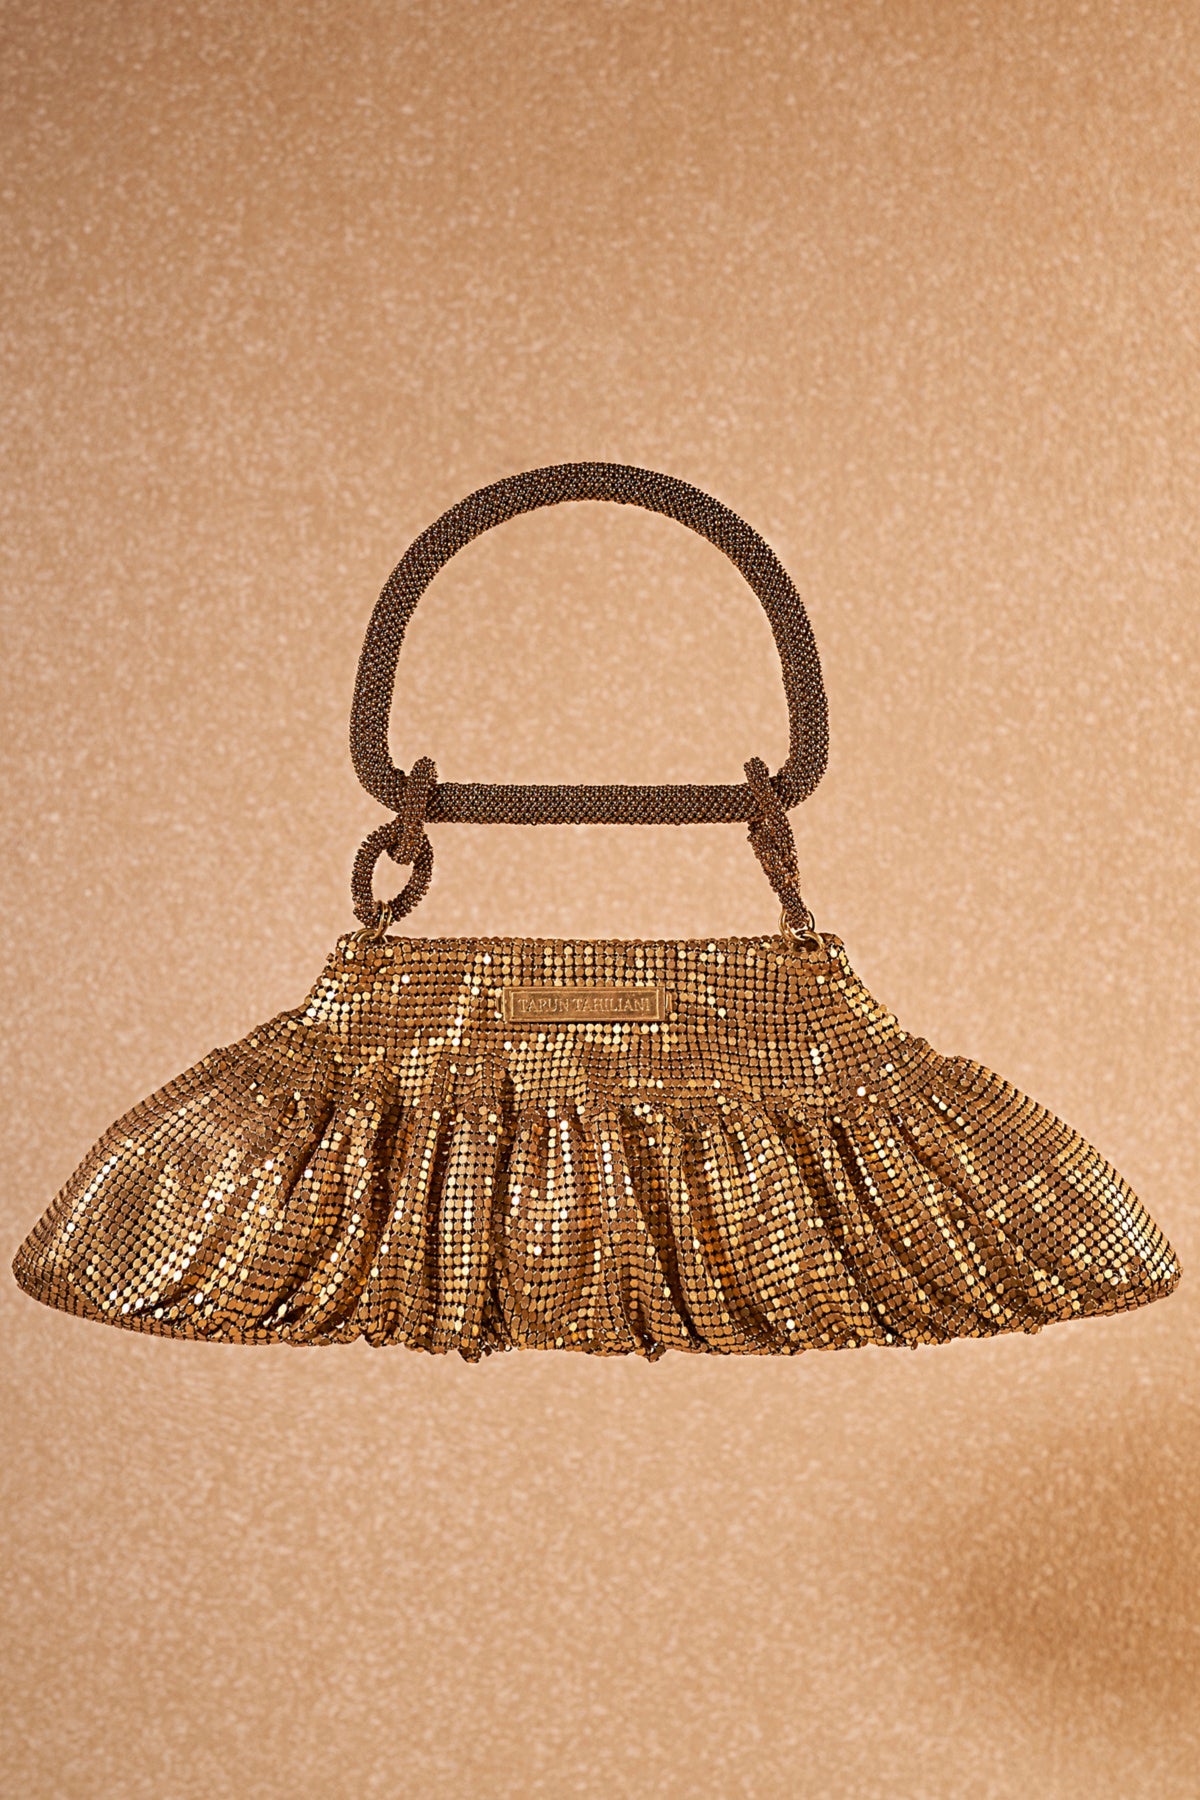 Antique Gold Chainmail Draped Bag